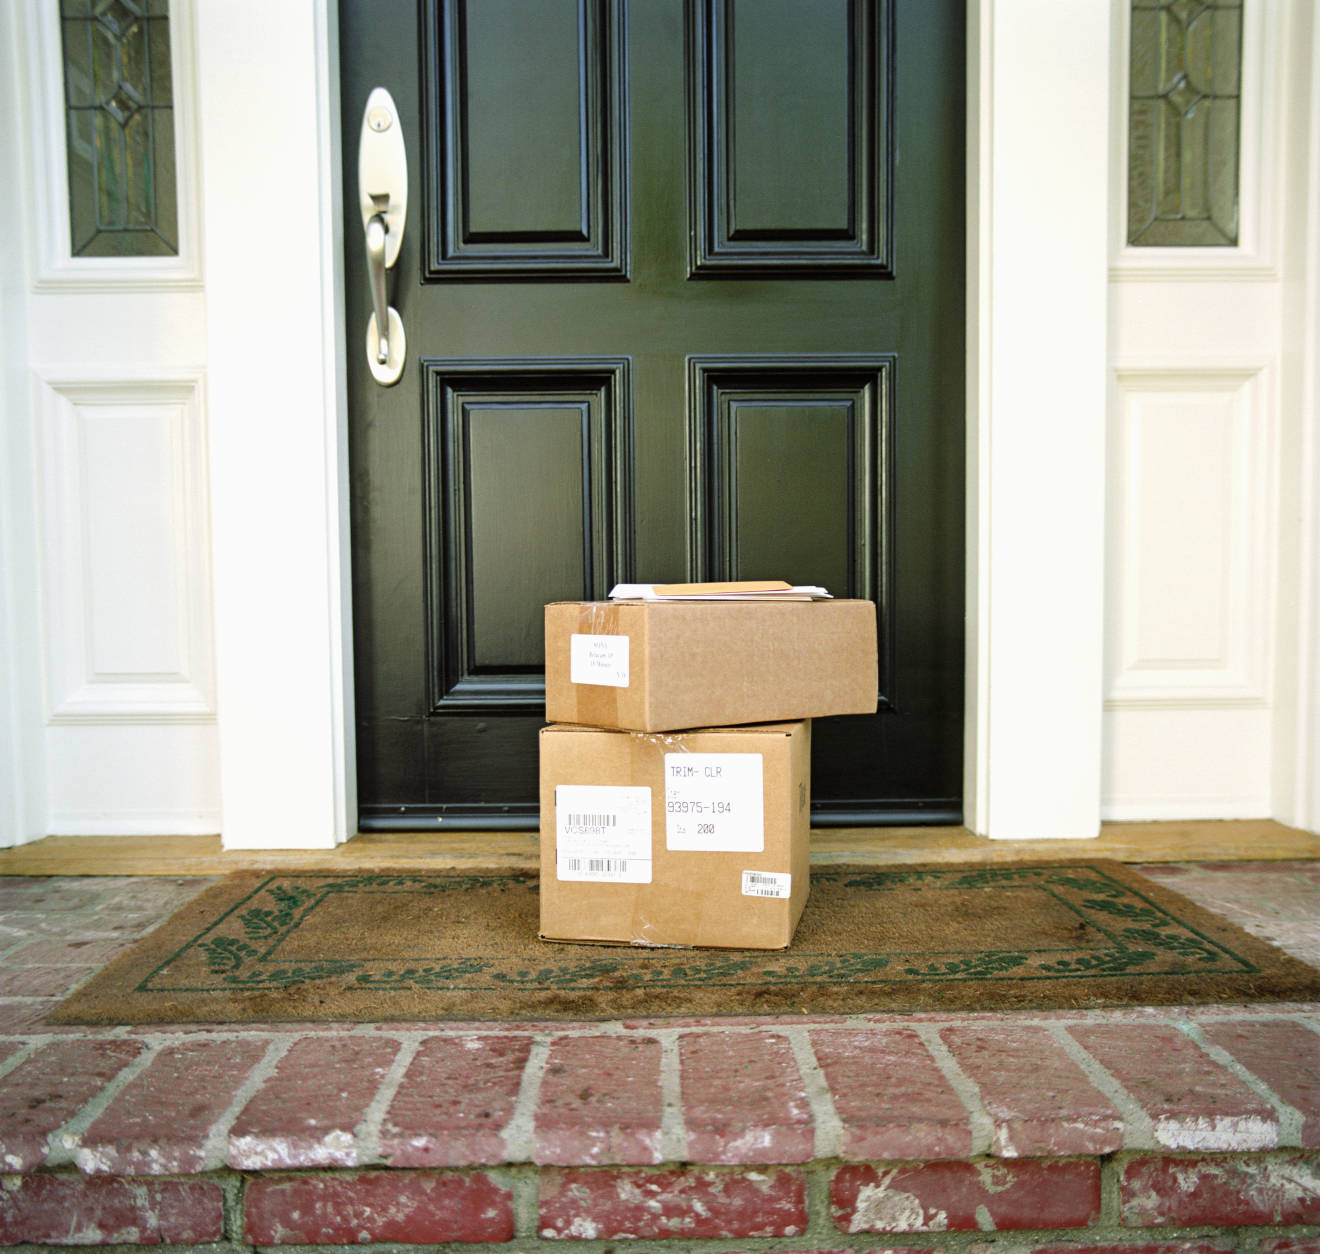 If you're a Prime member and you need something really fast, Prime Now offers free 2-hour shipping in parts of the D.C. Metro area.  And if you live within the D.C. city limits, more than one million items are available for Prime Free Same-Day Delivery. (Thinkstock)